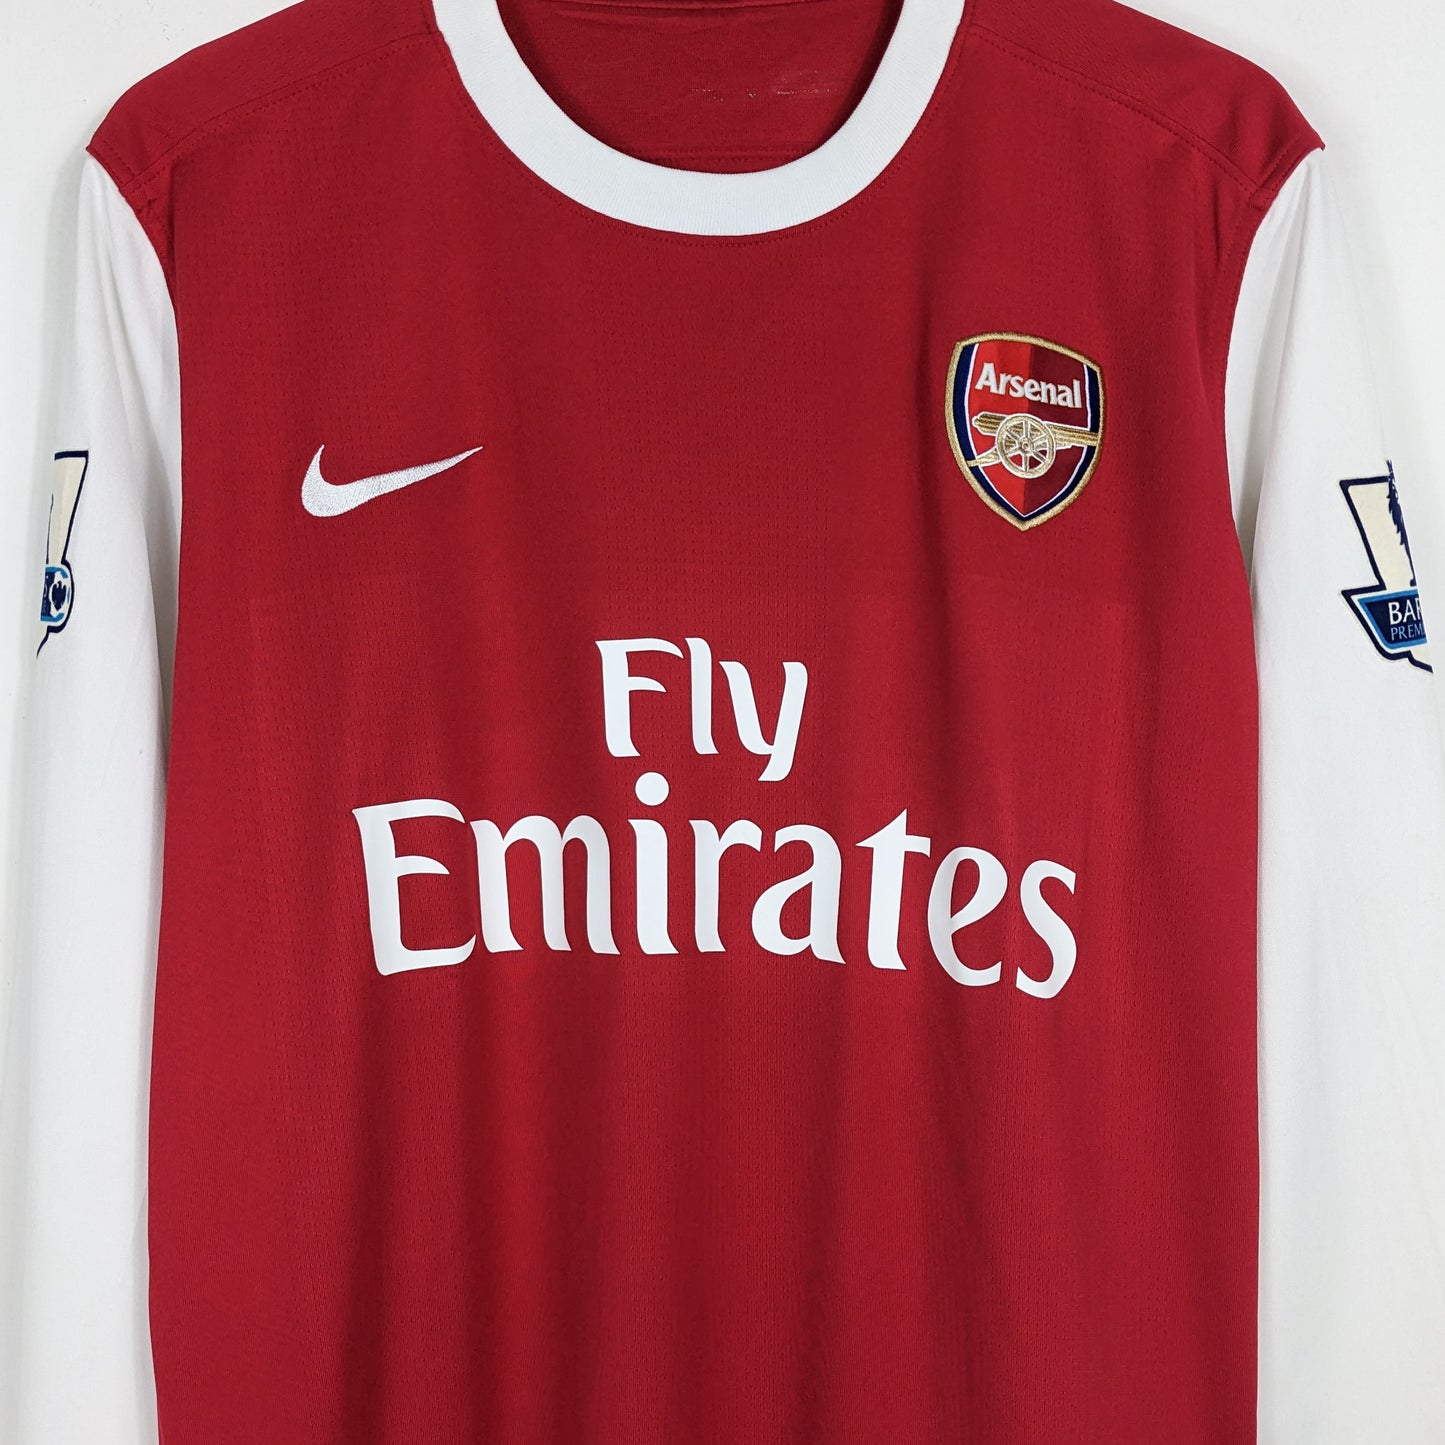 Authentic Arsenal 2010/2011 Home - Fabregas #4 Size M (Long Sleeve)